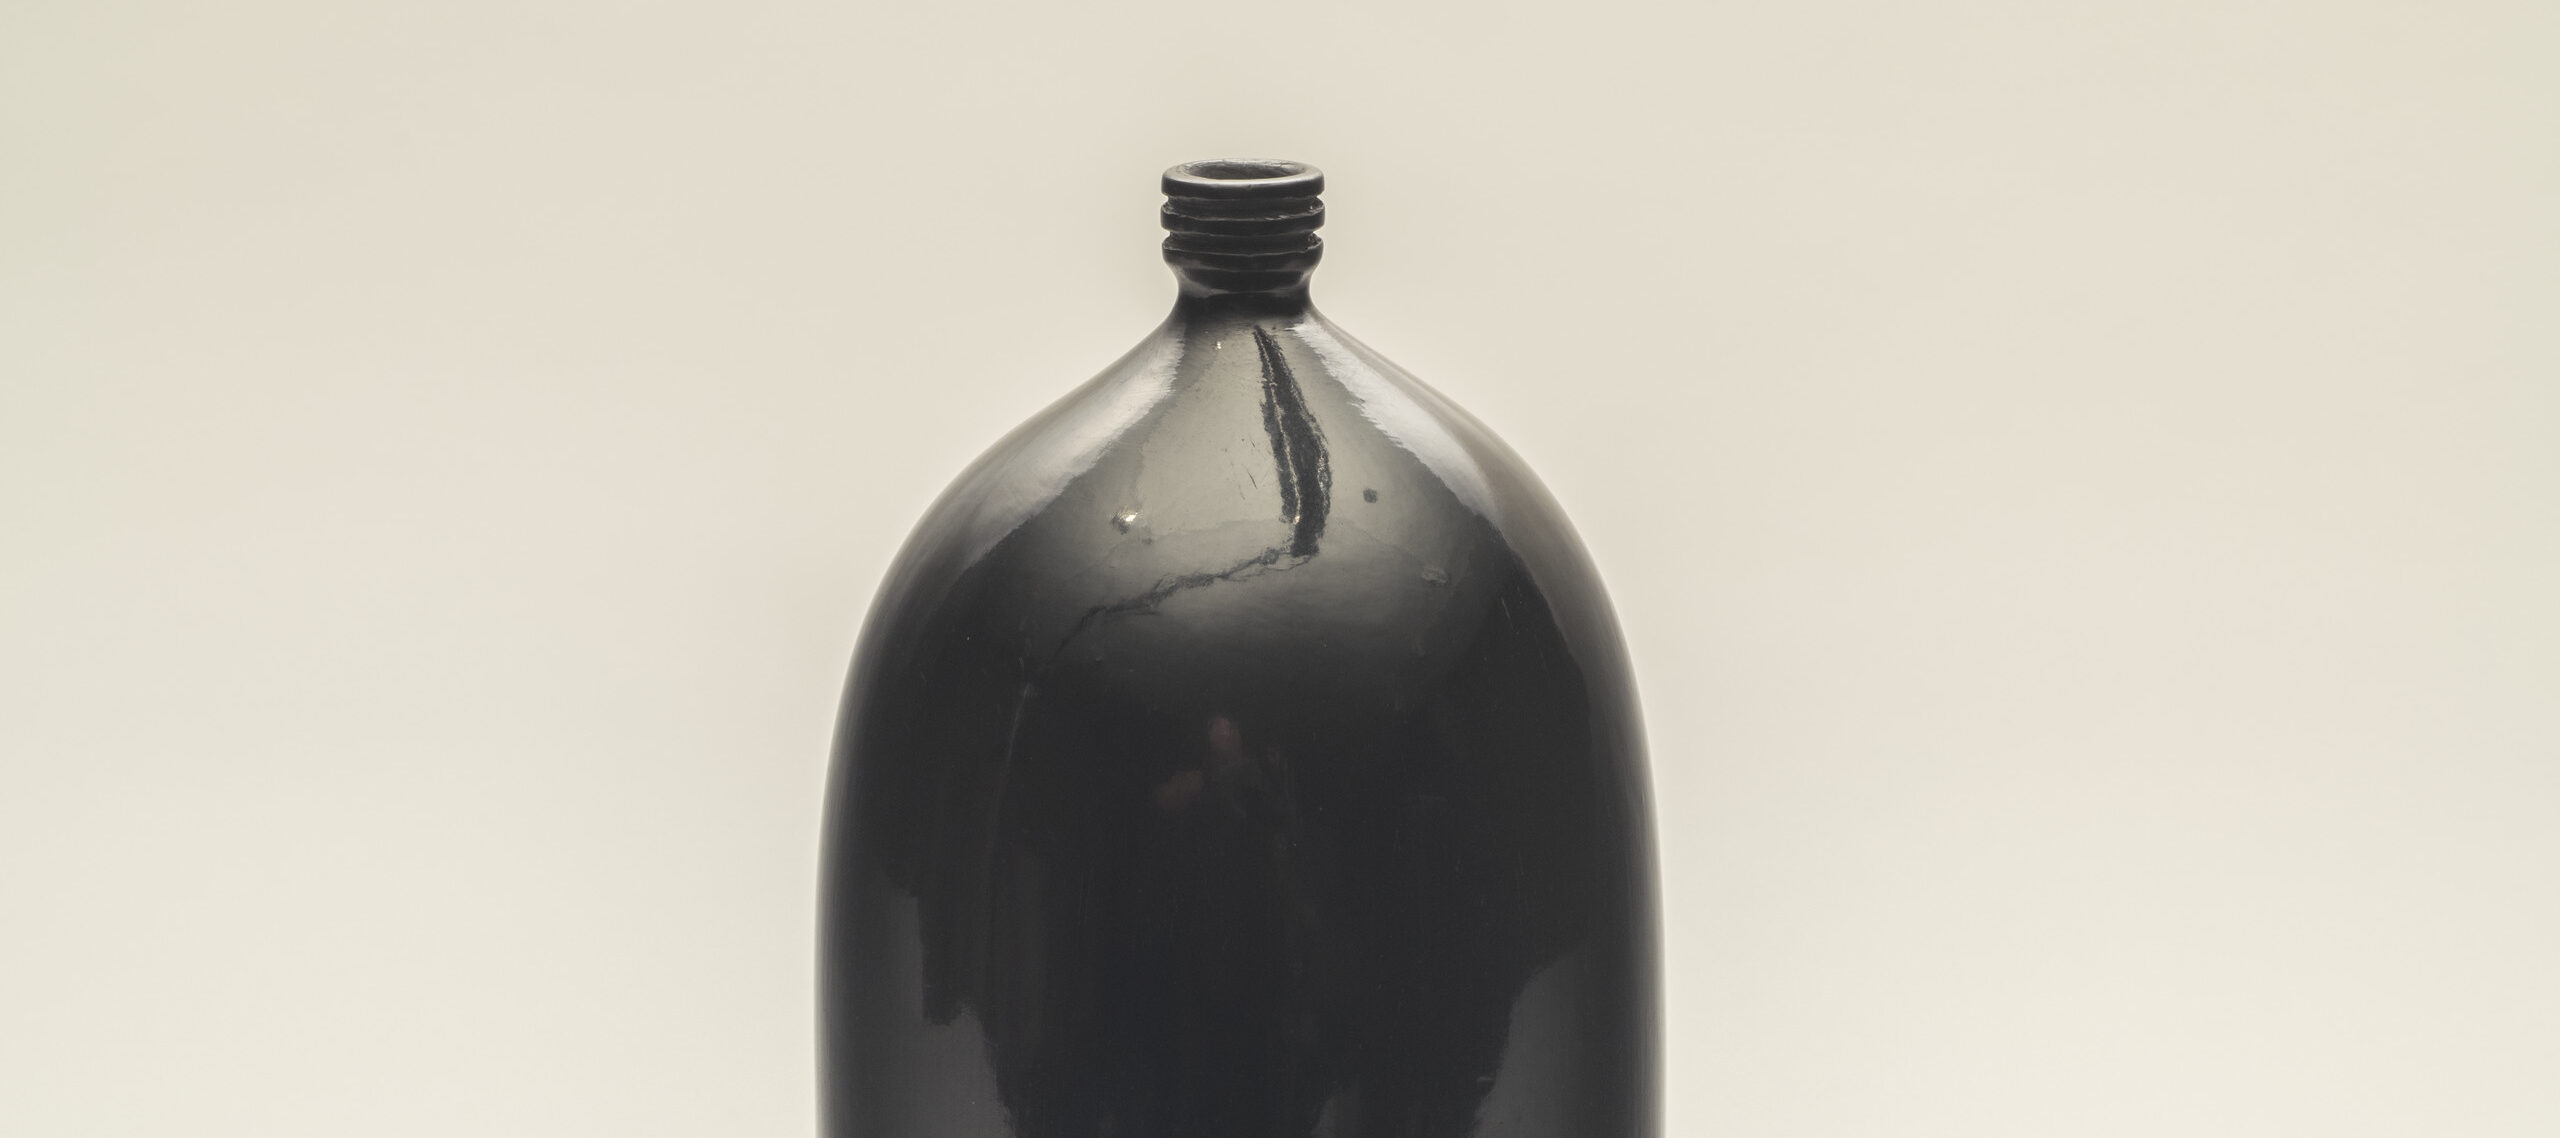 A smooth, glazed, black clay vessel shaped like a two-liter soda bottle.